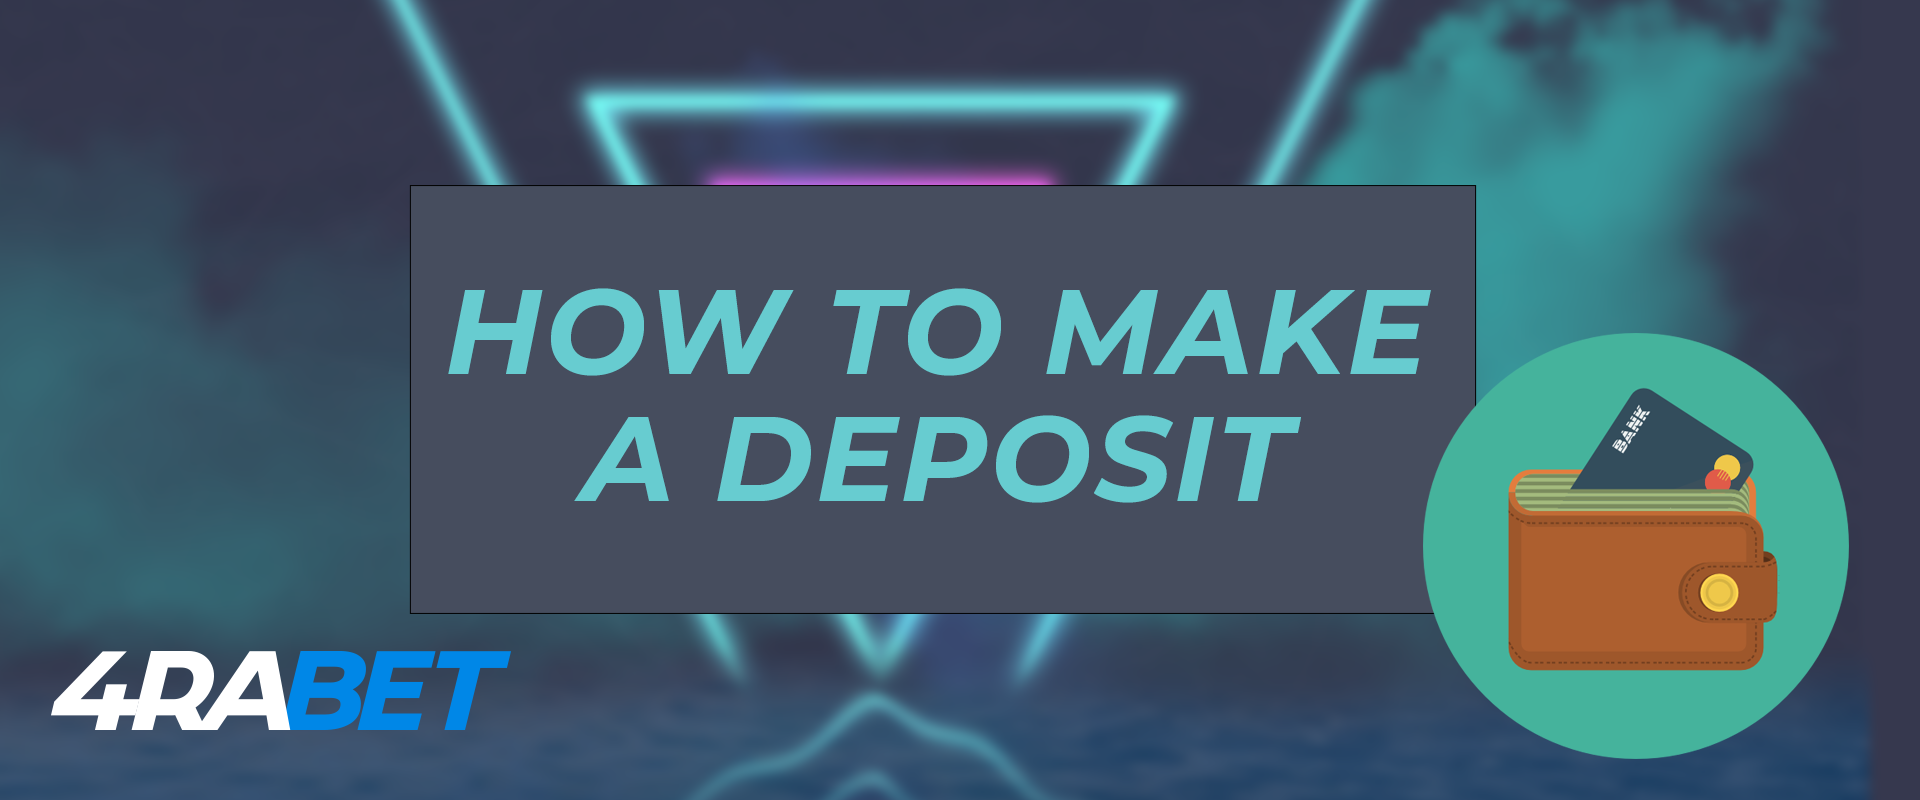 How to replenish an account on the 4rabet.